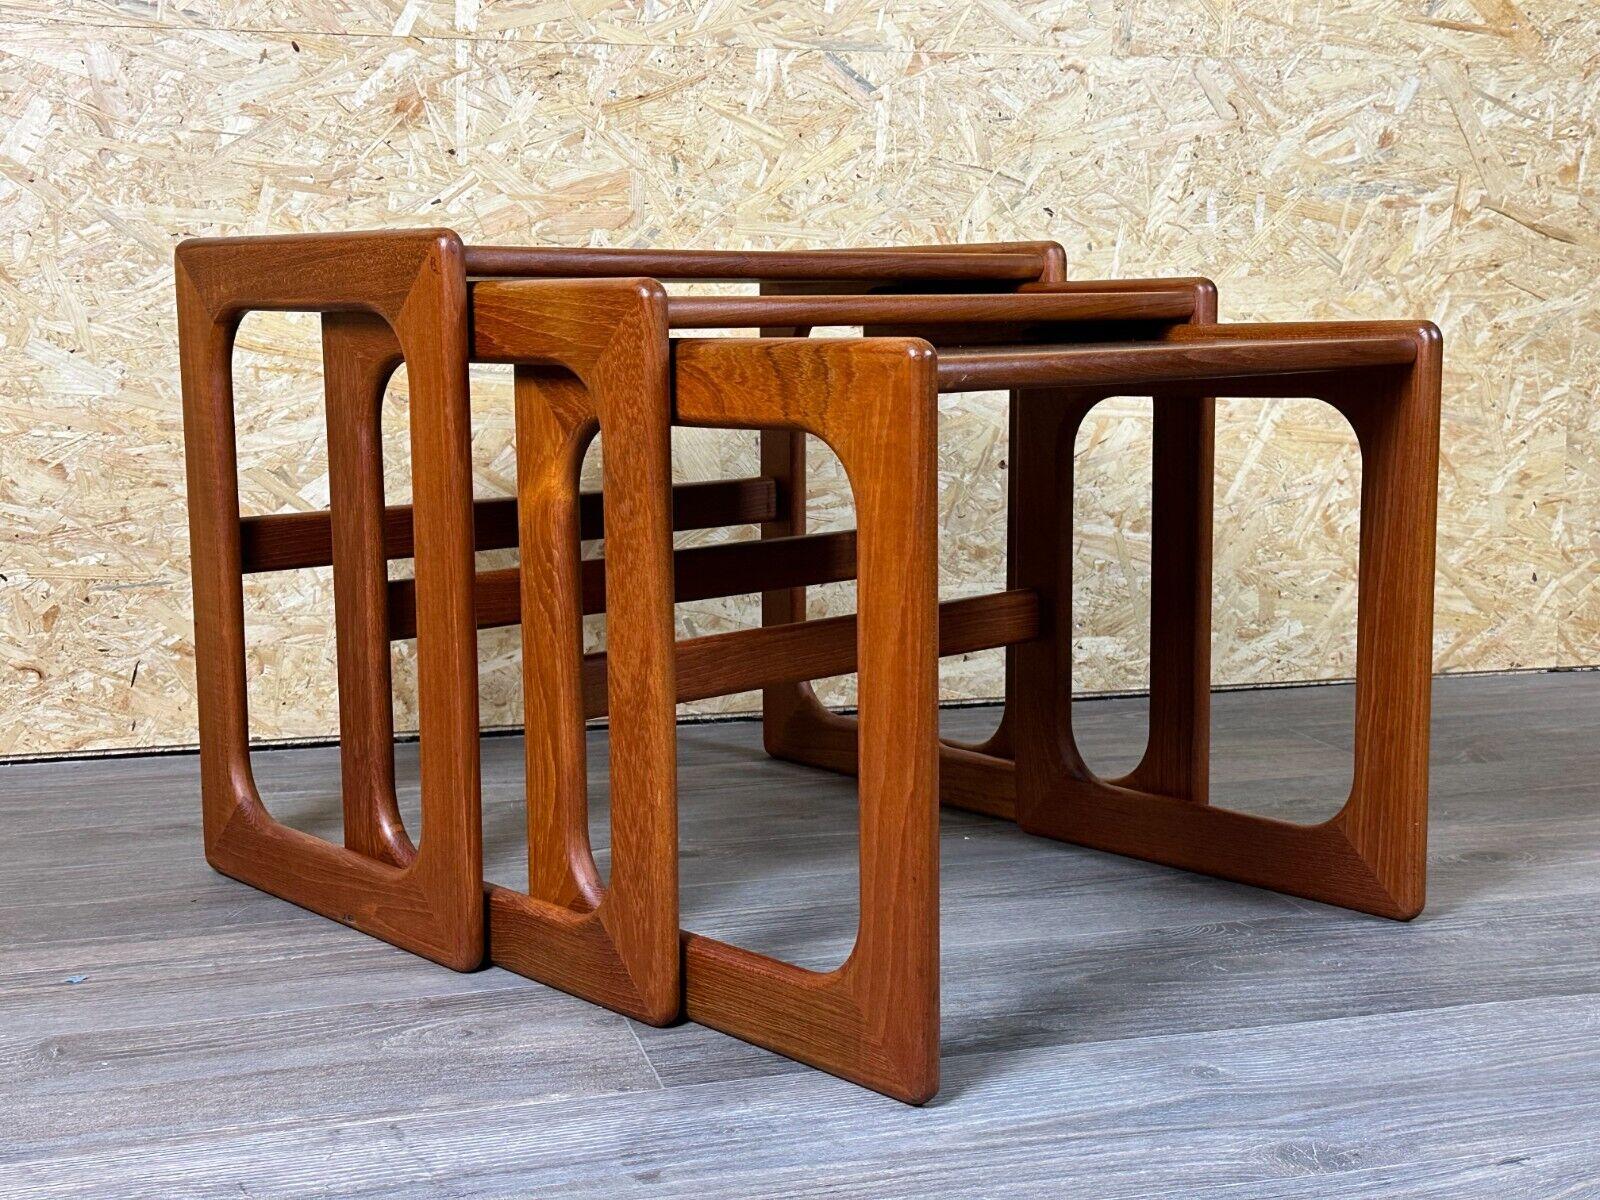 60s 70s Teak Nesting Tables side tables by Salin Nybor Denmark Design In Good Condition For Sale In Neuenkirchen, NI